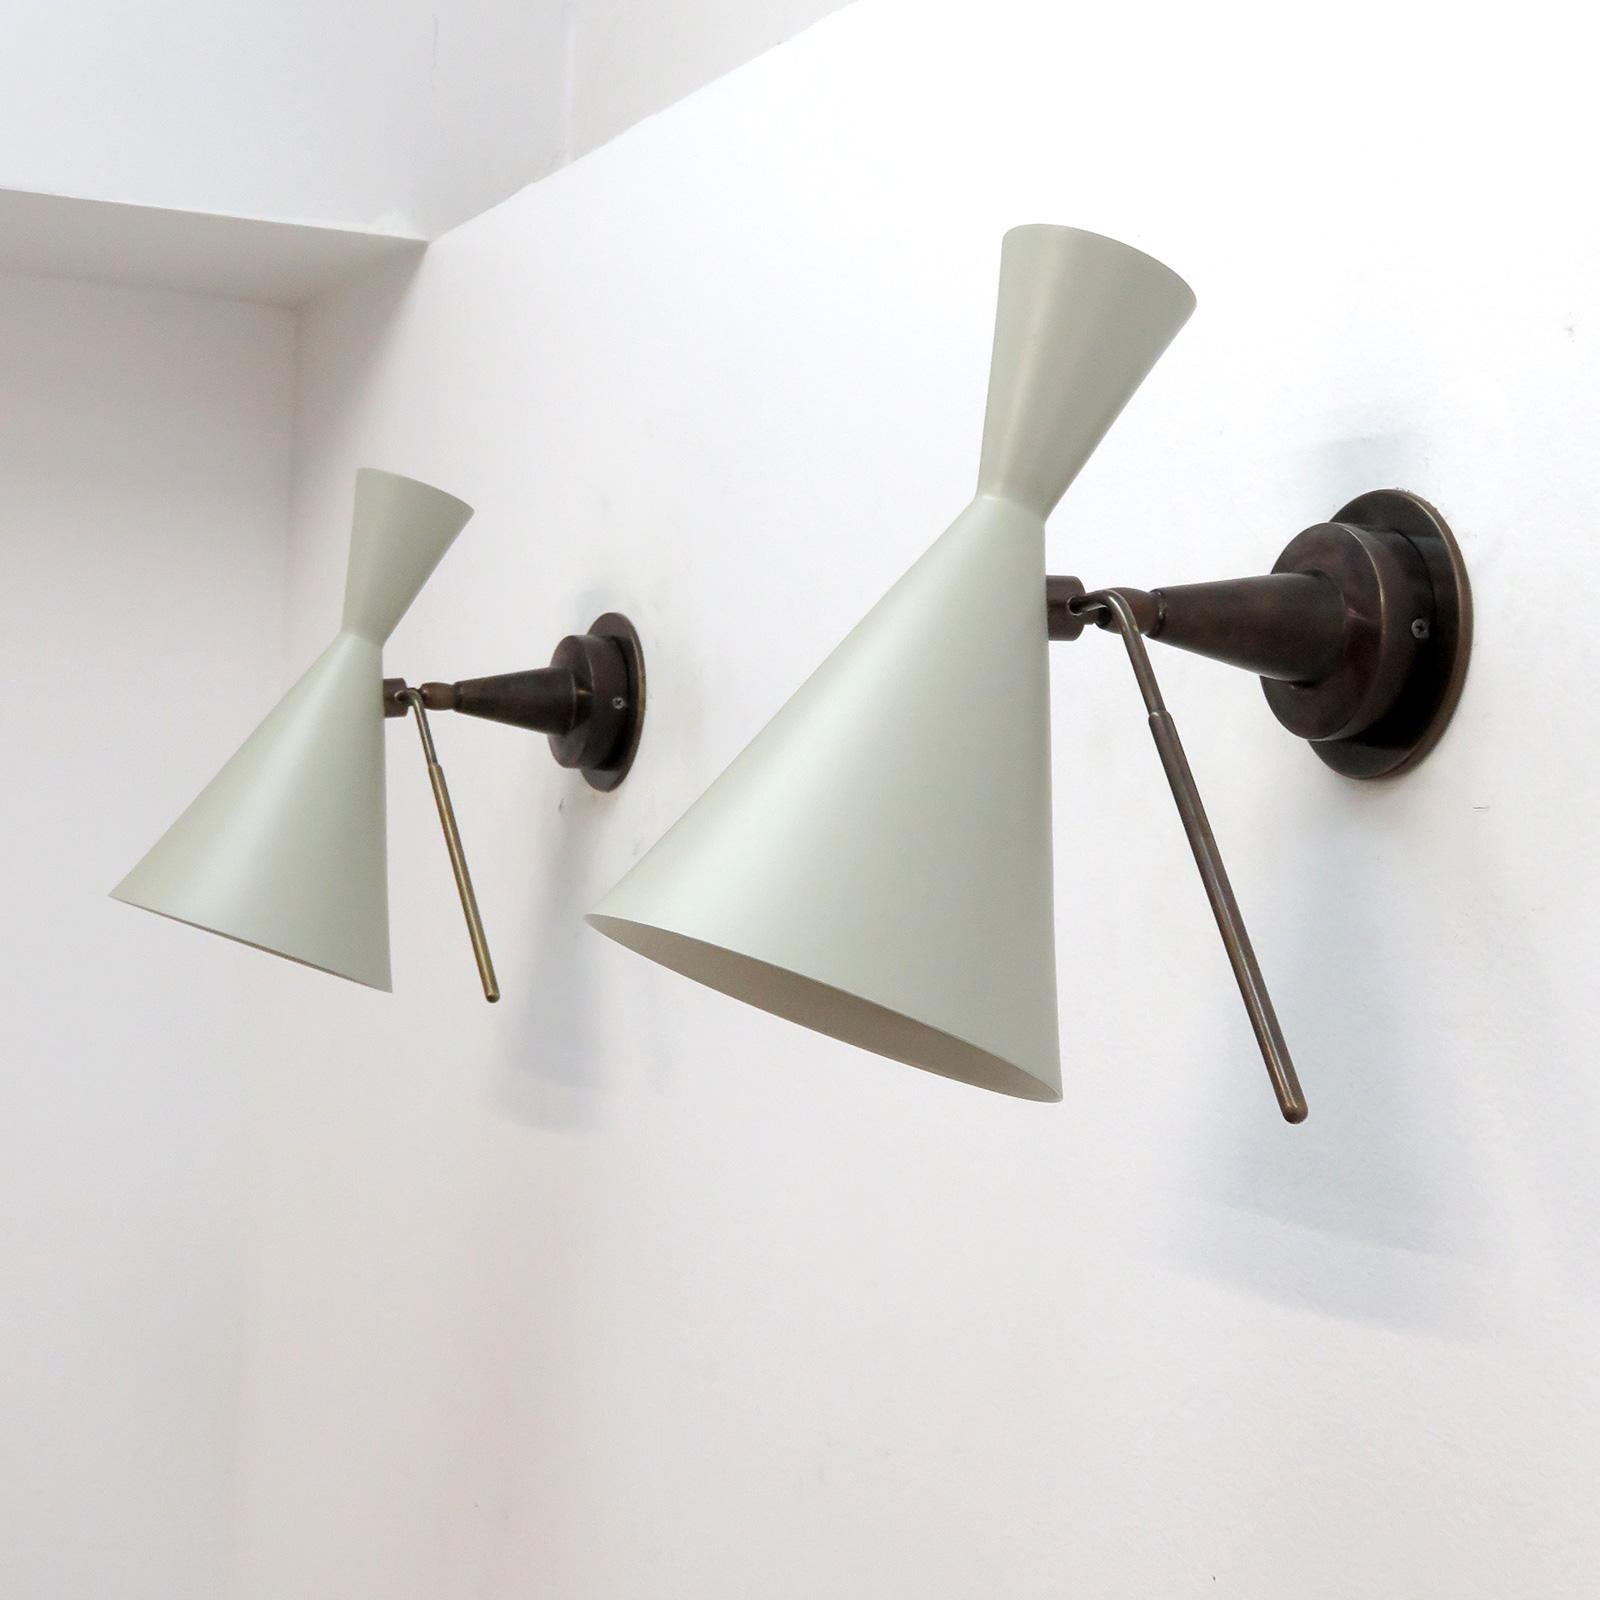 wonderful articulate Italian wall lights with off-white/light grey enameled double cone shades on dark patinaed brass armature with a pronounced handle for shade adjustment on the right side of the fixture, wired for US standards, one E27 socket per